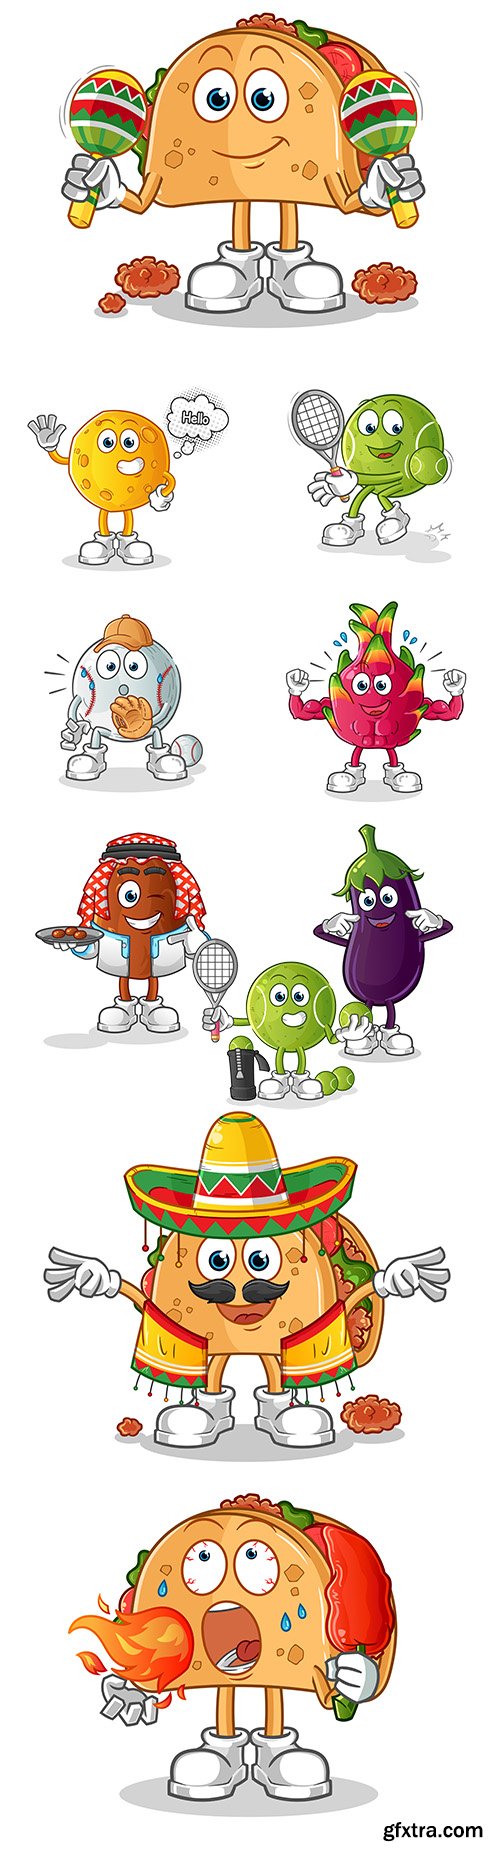 Fruit and vegetables cartoon characters illustration
